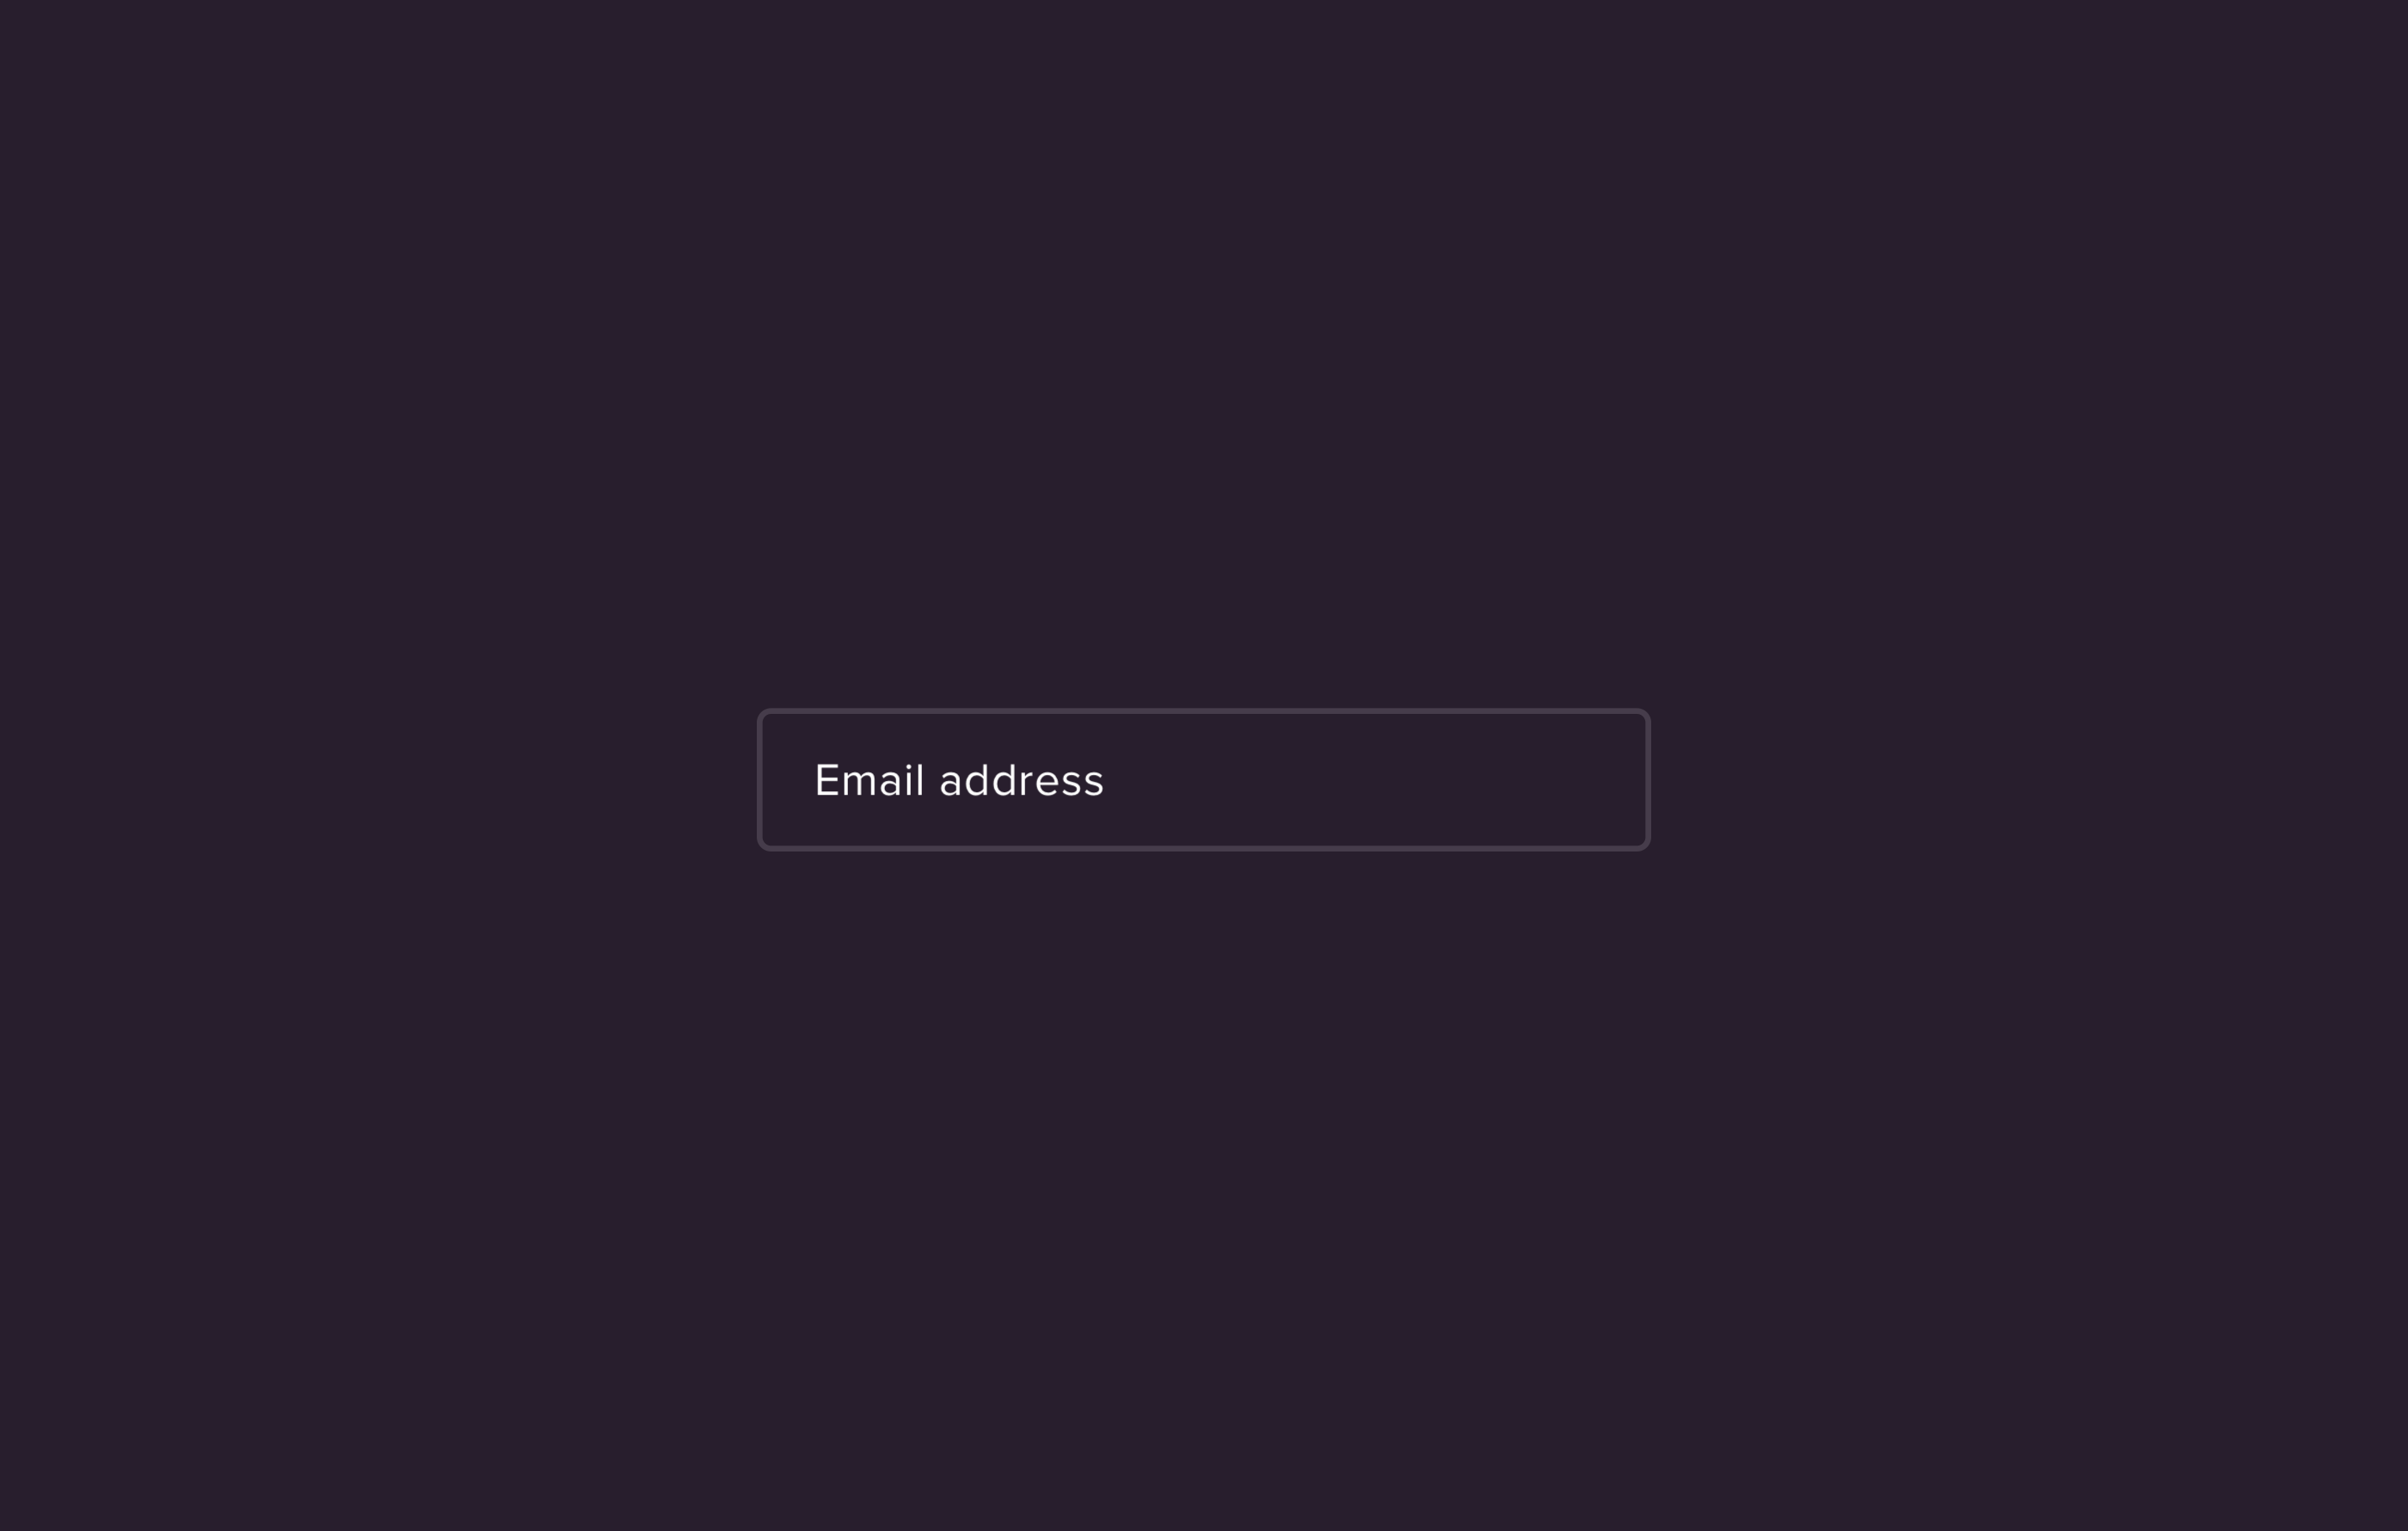 Animated GIF of an email address text form field on a dark purple background